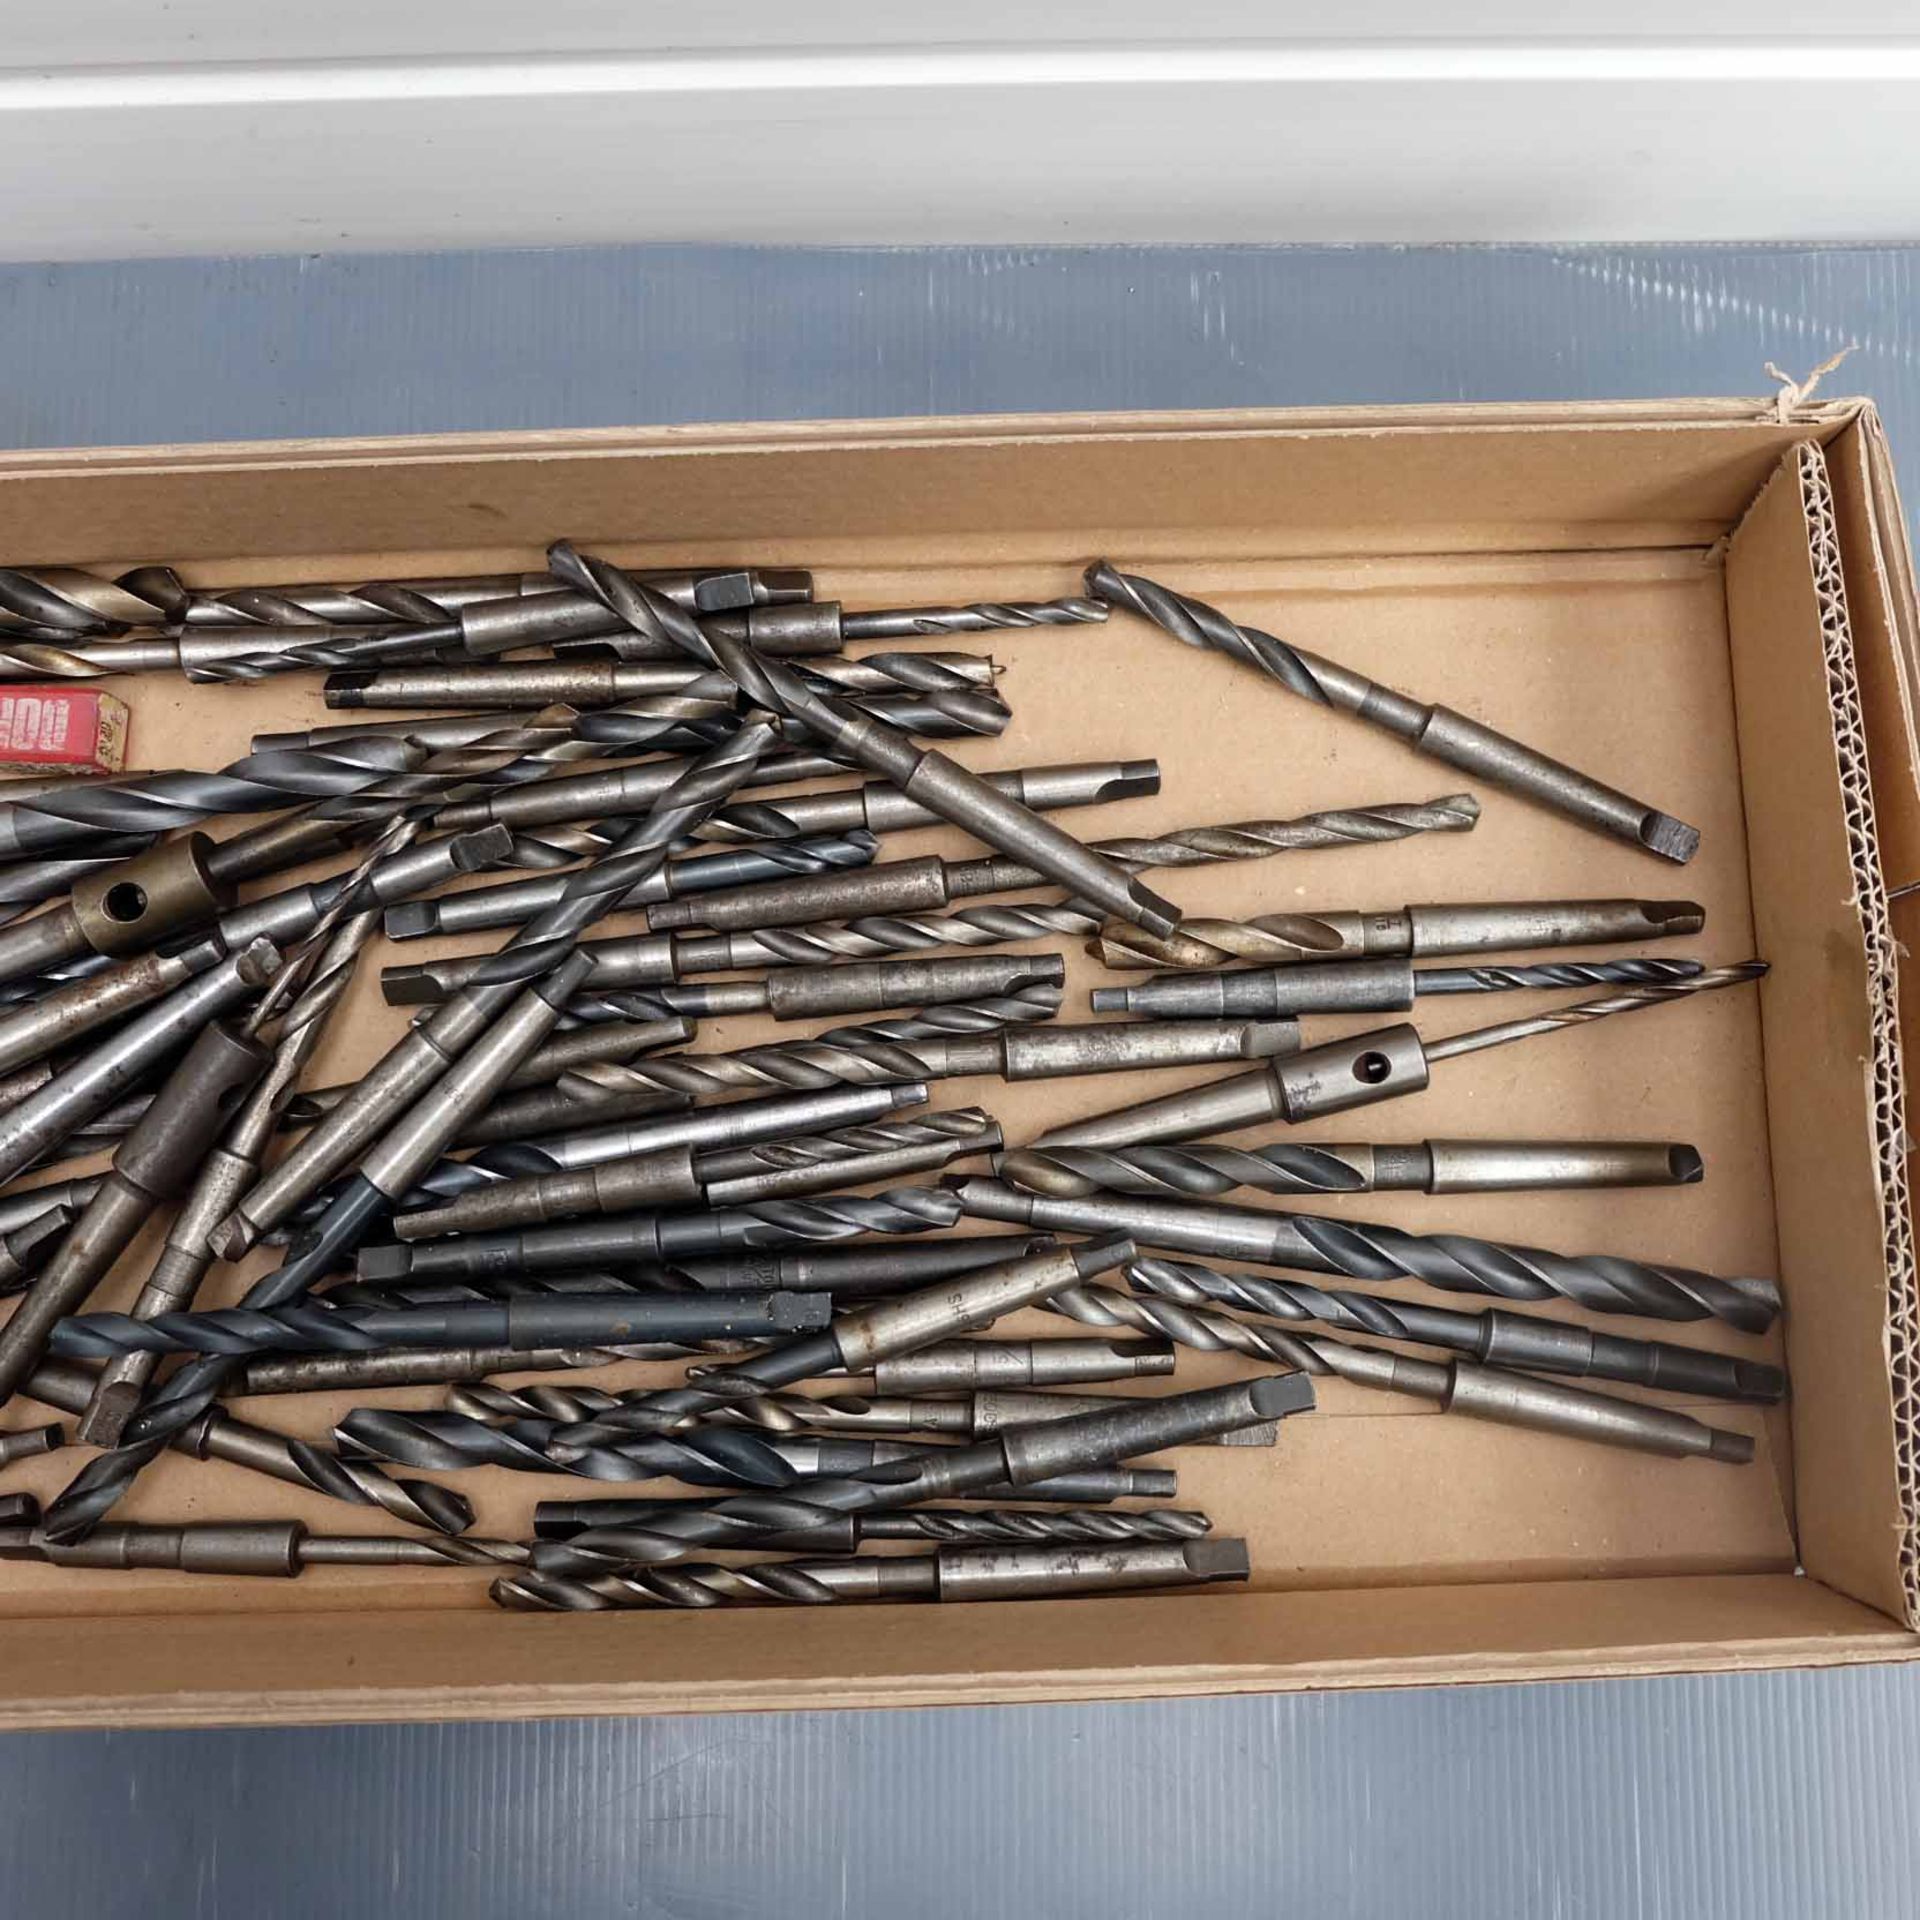 Quantity of 1 Morse Taper Twist Drills. Various Sizes. - Image 3 of 3